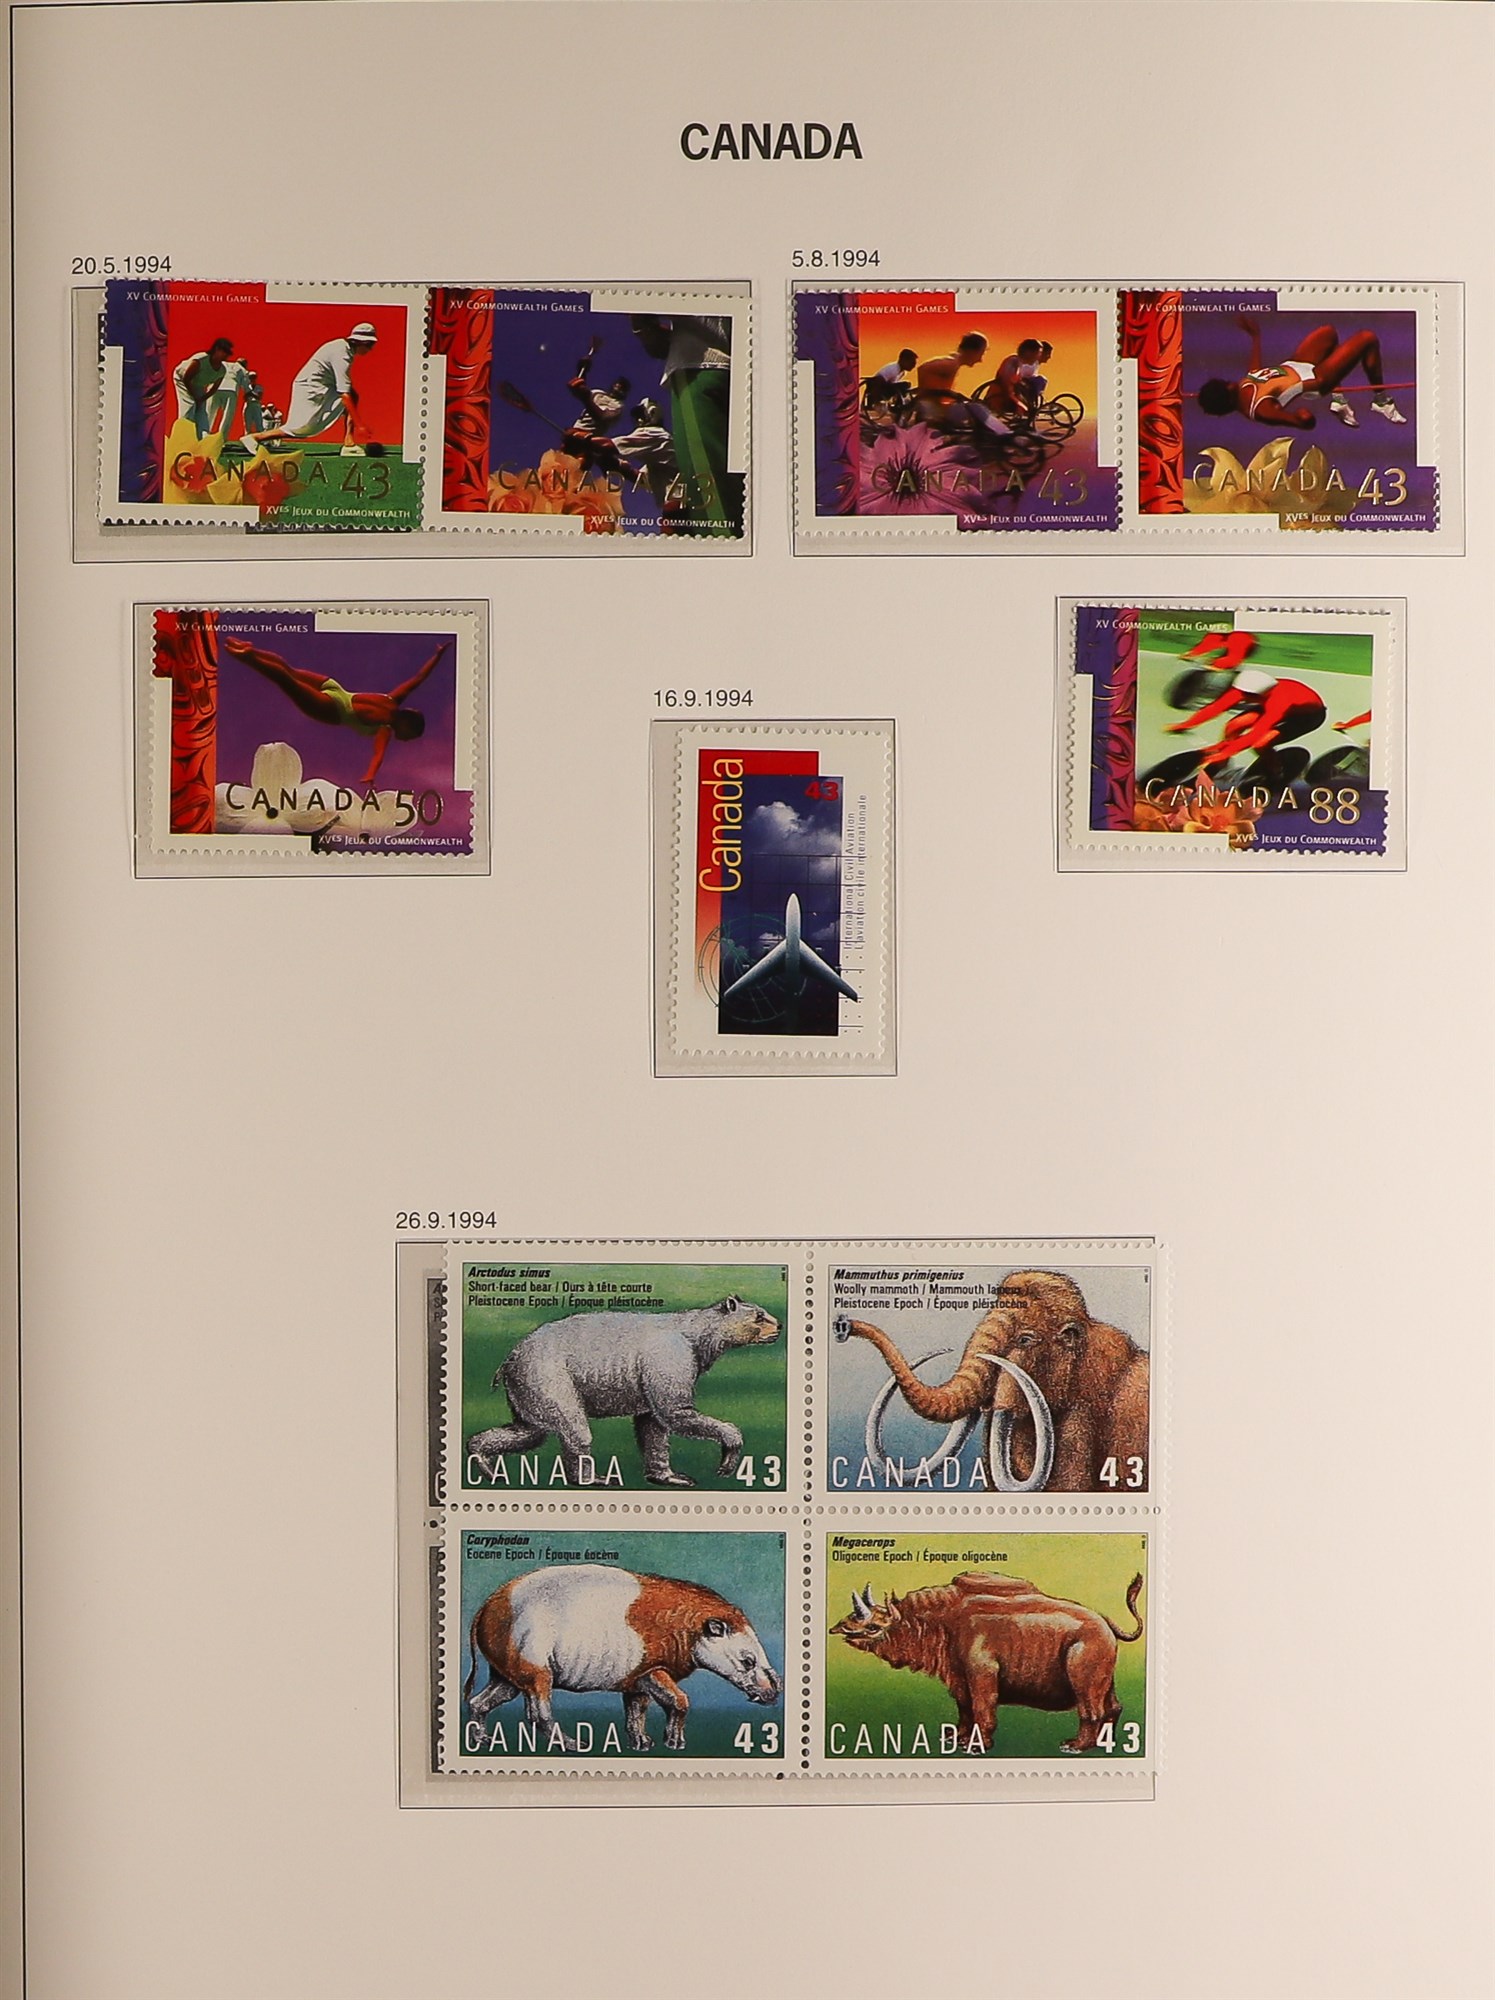 CANADA 1990 - 2002 NEVER HINGED MINT COLLECTION in DAVO Canada hingeless album, largely complete ( - Image 4 of 13